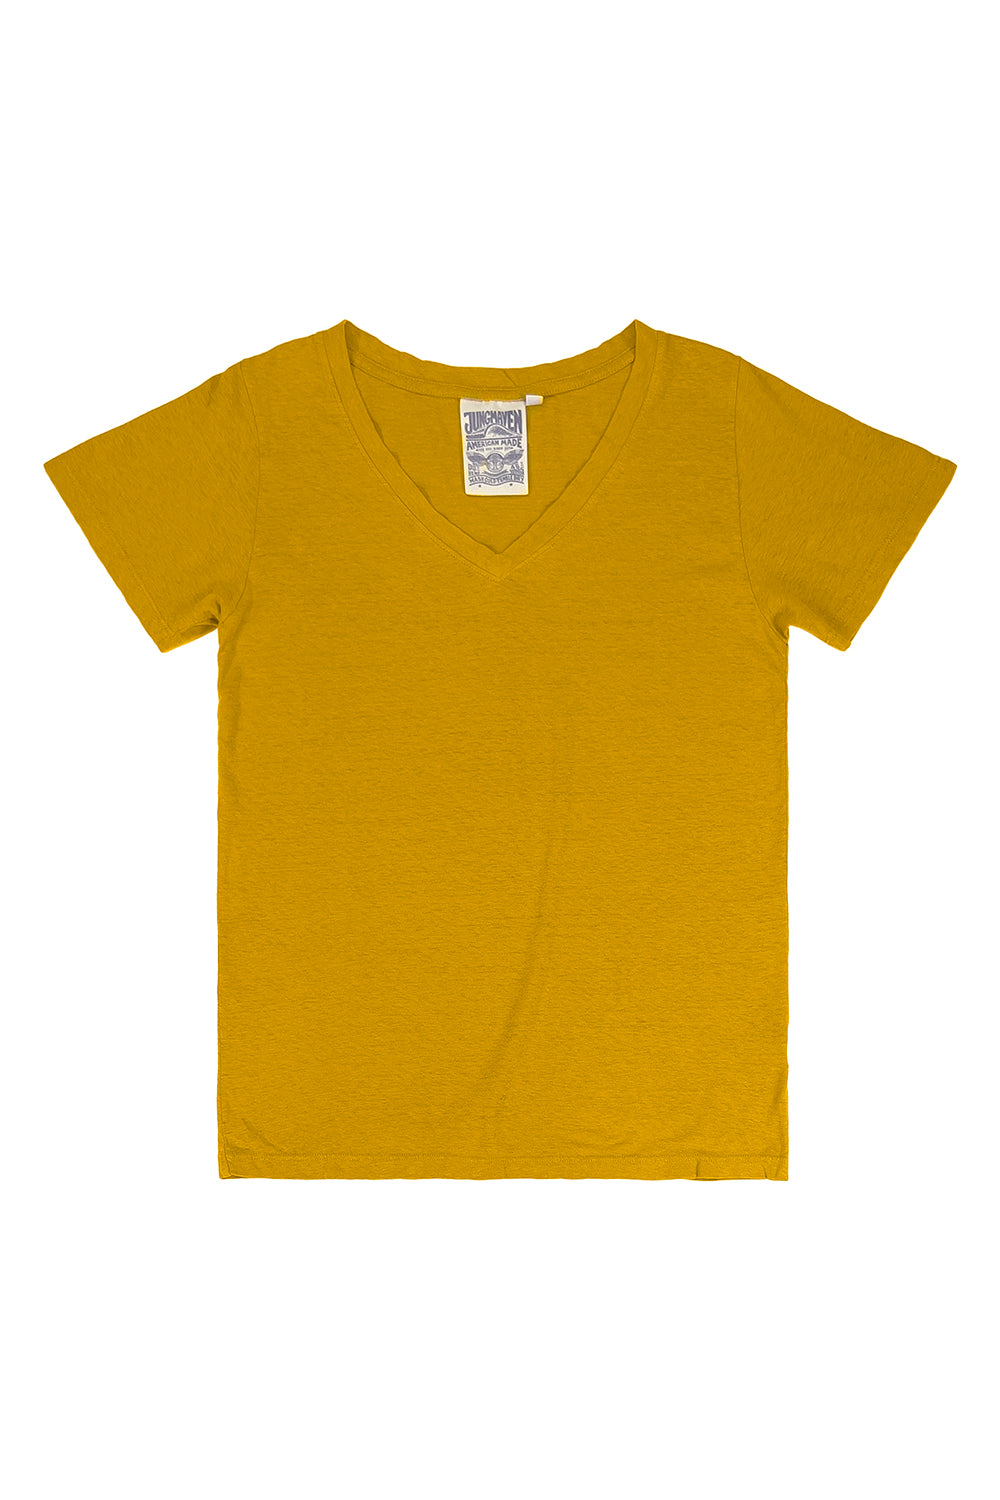 Paige V-neck | Jungmaven Hemp Clothing & Accessories / Color: Spicy Mustard